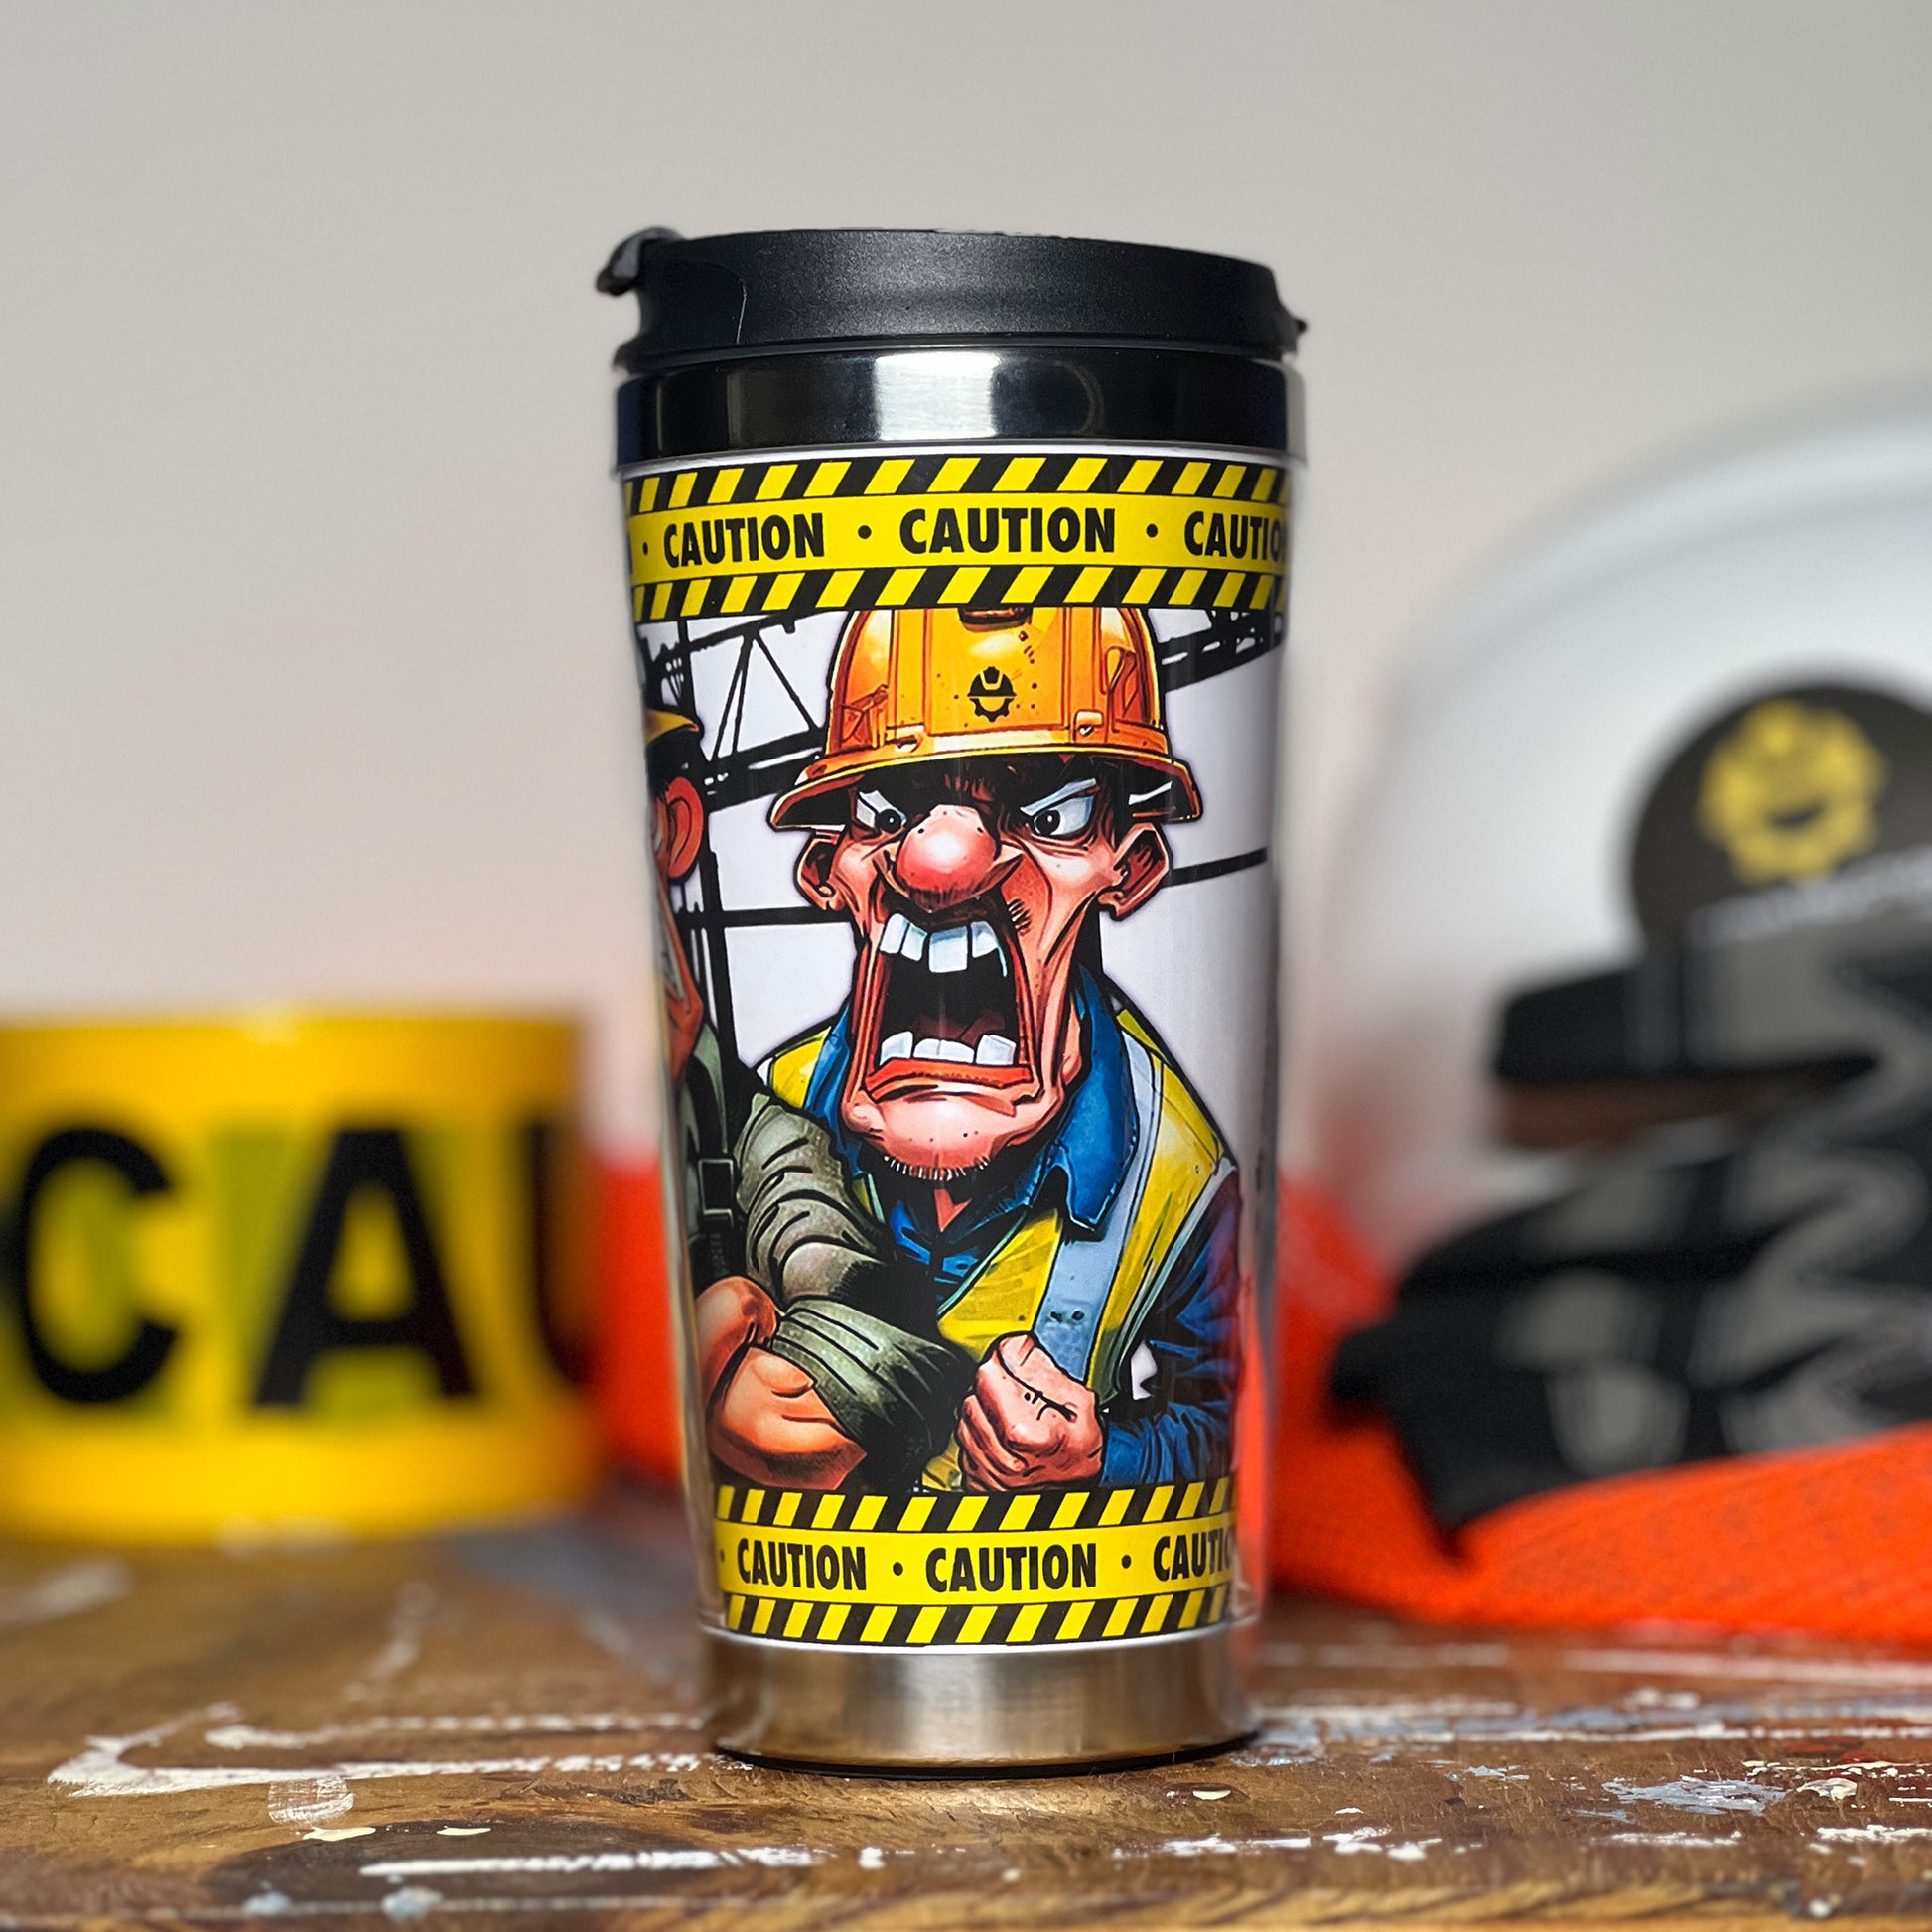 Construction Grind's "Meet the Crew" First Shift 12 oz. coffee tumbler. Showing our Safety Manager, "Danny", one of three crew members shown on the tumbler.